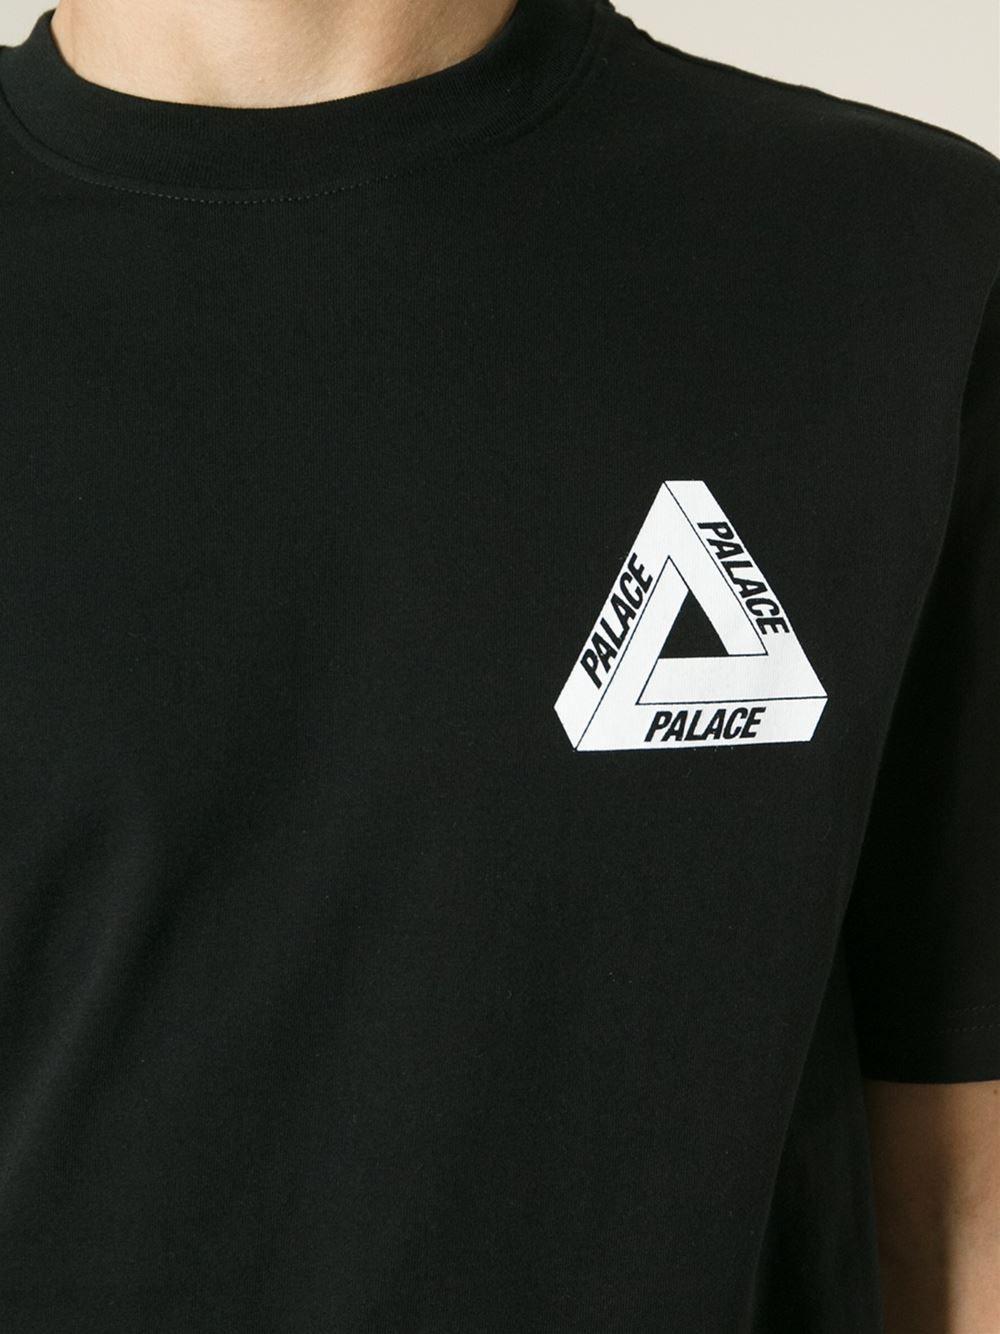 Palace Clothes Logo - Palace Logo T Shirt In Black For Men